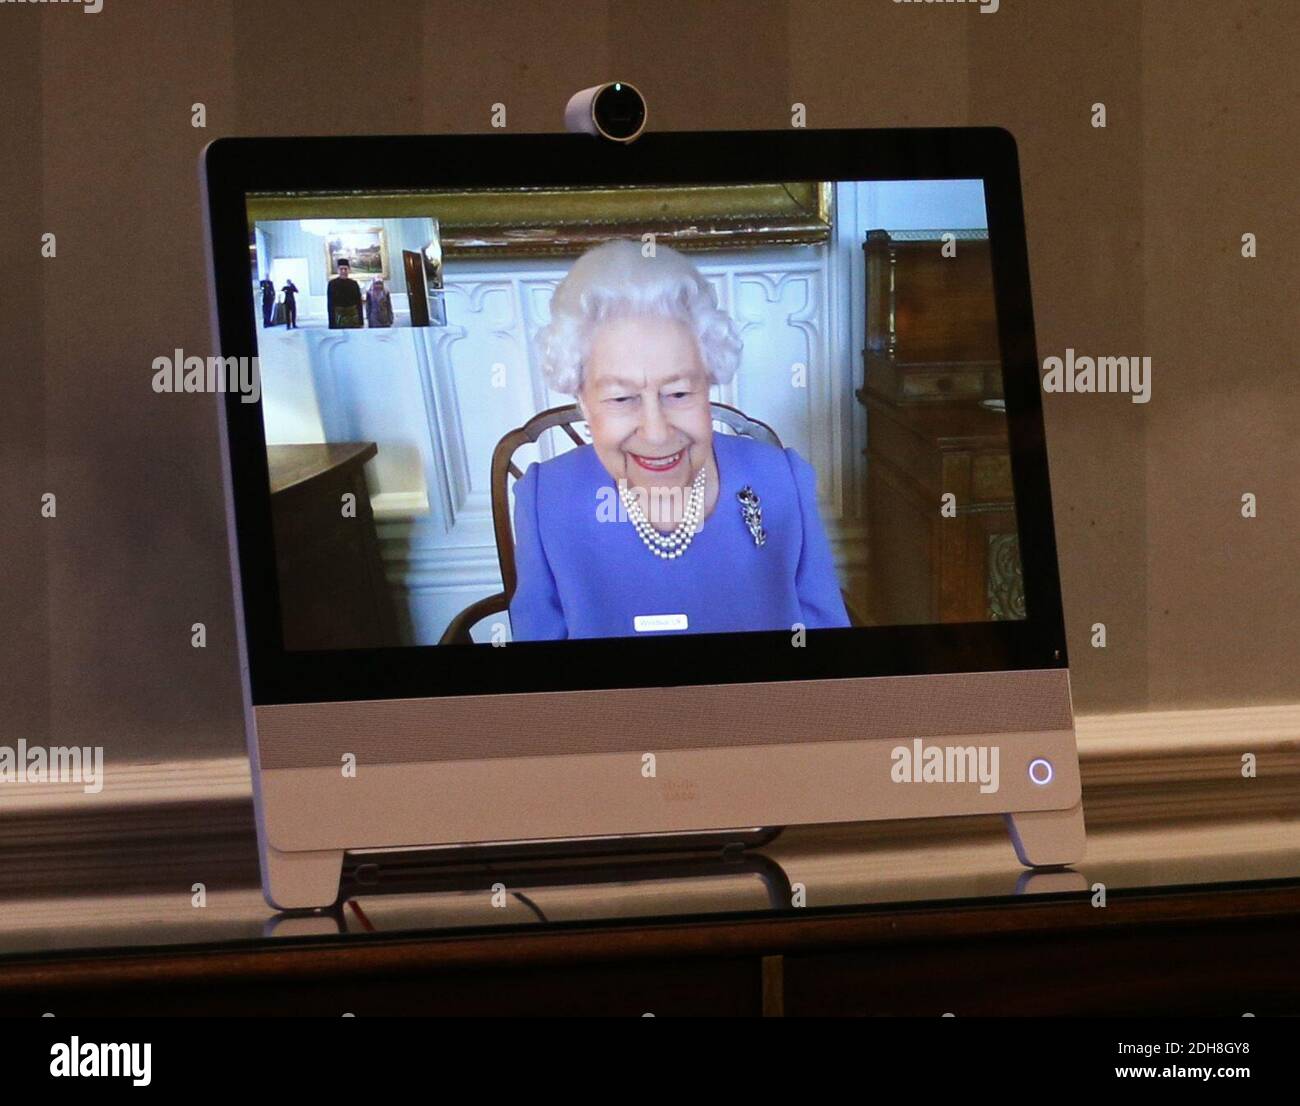 Queen Elizabeth II appears on a screen by videolink from Windsor Castle, where she is in residence, during a virtual audience to receive His Excellency the High Commissioner for Brunei Darussalam First Admiral Pengiran Dato Seri Pahlawan Norazmi bin Pengiran Haji Muhammad and his wife, Pg Datin Noralam binti Pg Hj Kahar, who were at London's Buckingham Palace. Stock Photo